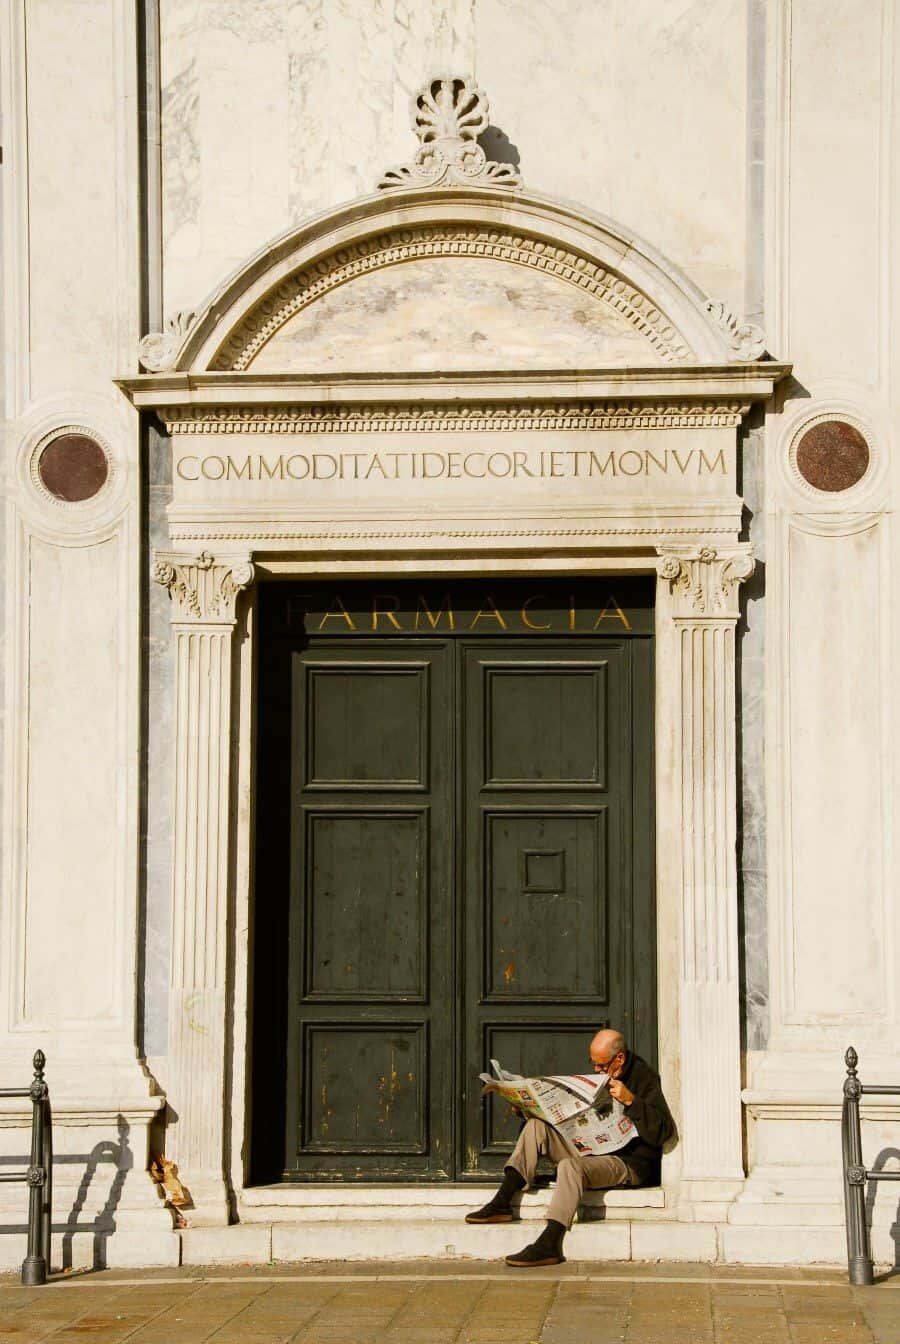 Venice, Italy: An example of capturing a local going about their day and blending it with a sense of place. Reading his paper on the steps of this cathedral, the composition of the scene was already done for me.